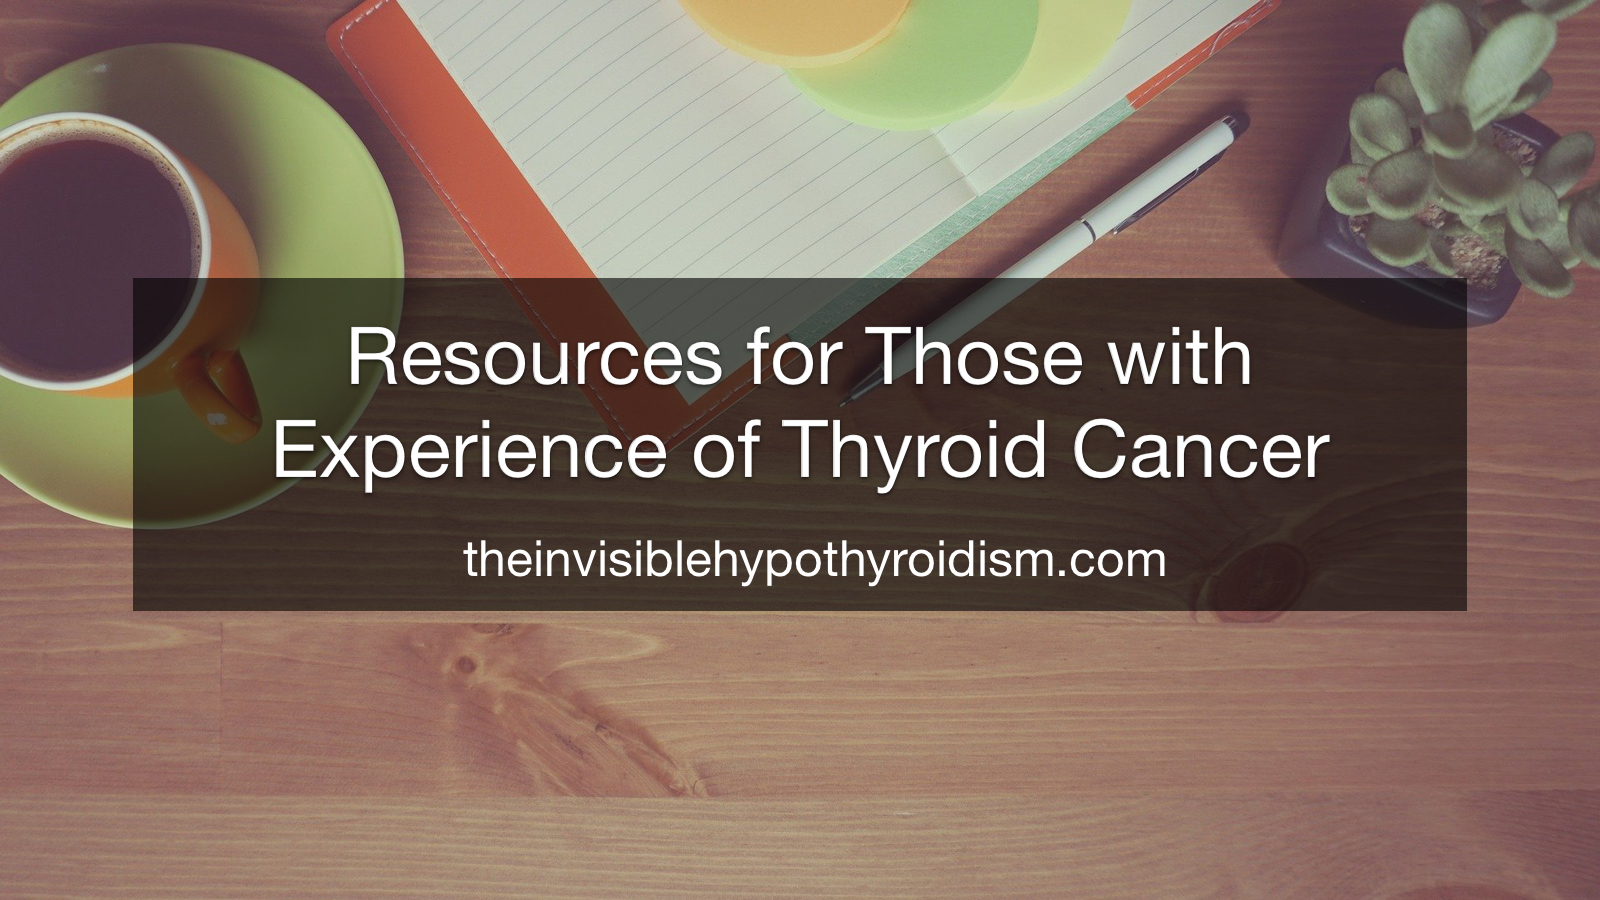 Resources for Those with Experience of Thyroid Cancer